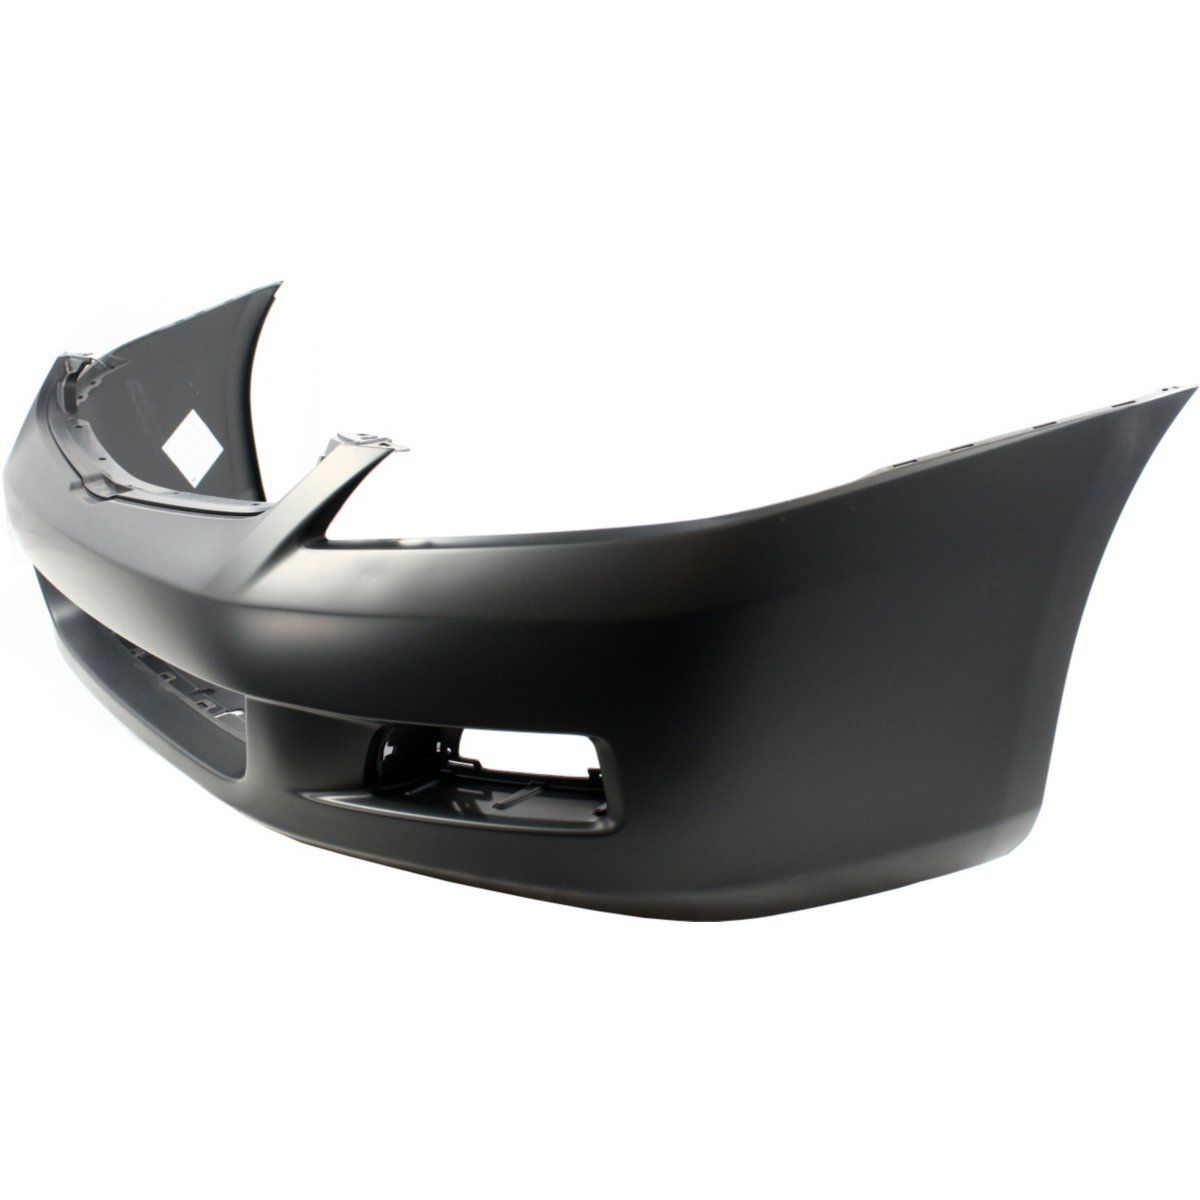 2006-2007 HONDA ACCORD Front Bumper Cover 4dr sedan  USA/Mexico built Painted to Match